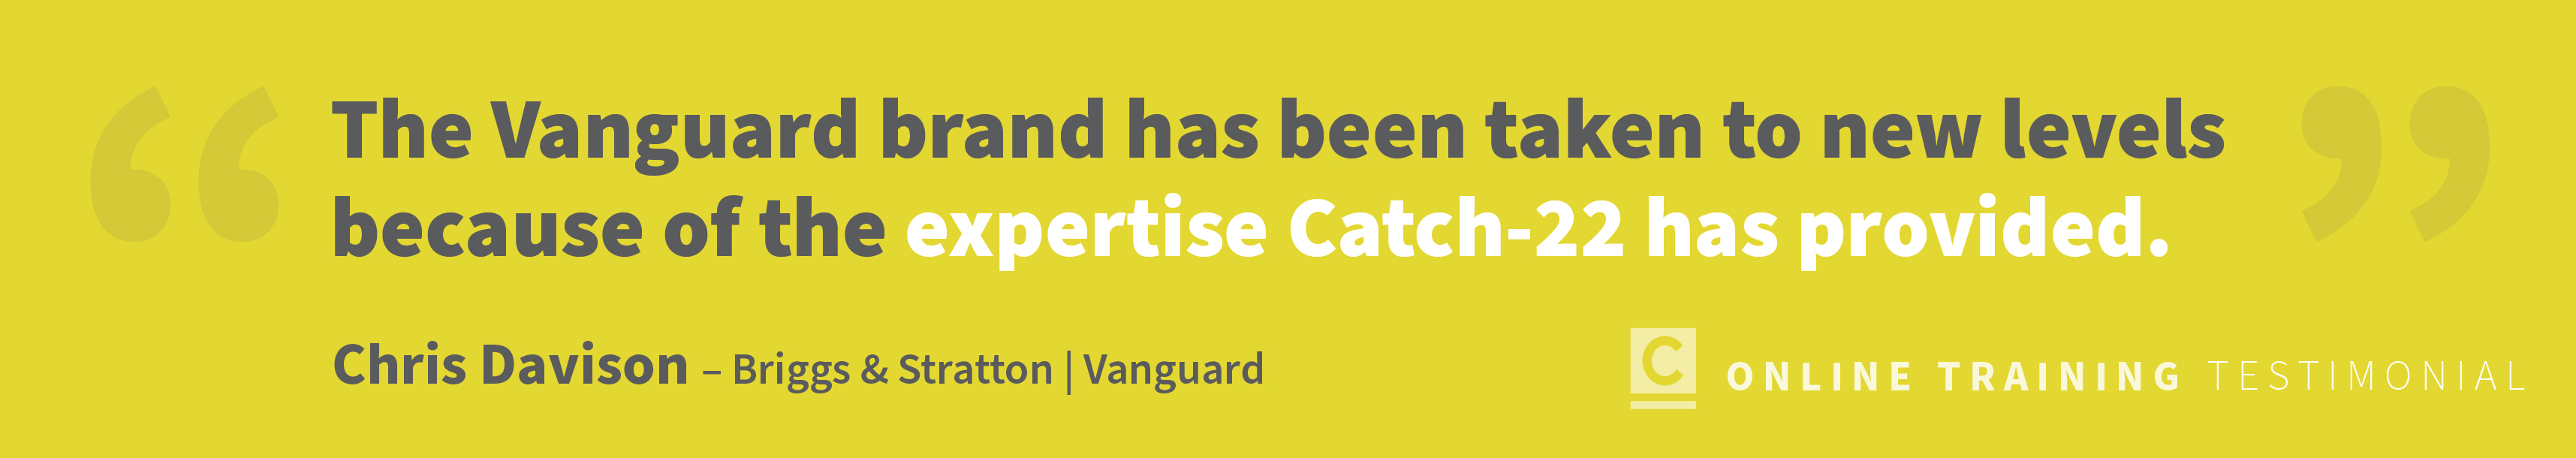 testimonial copy: The Vanguard brand has been taken to new levels because of the expertise Catch 22 has provided. -Chris Davison, Vanguard